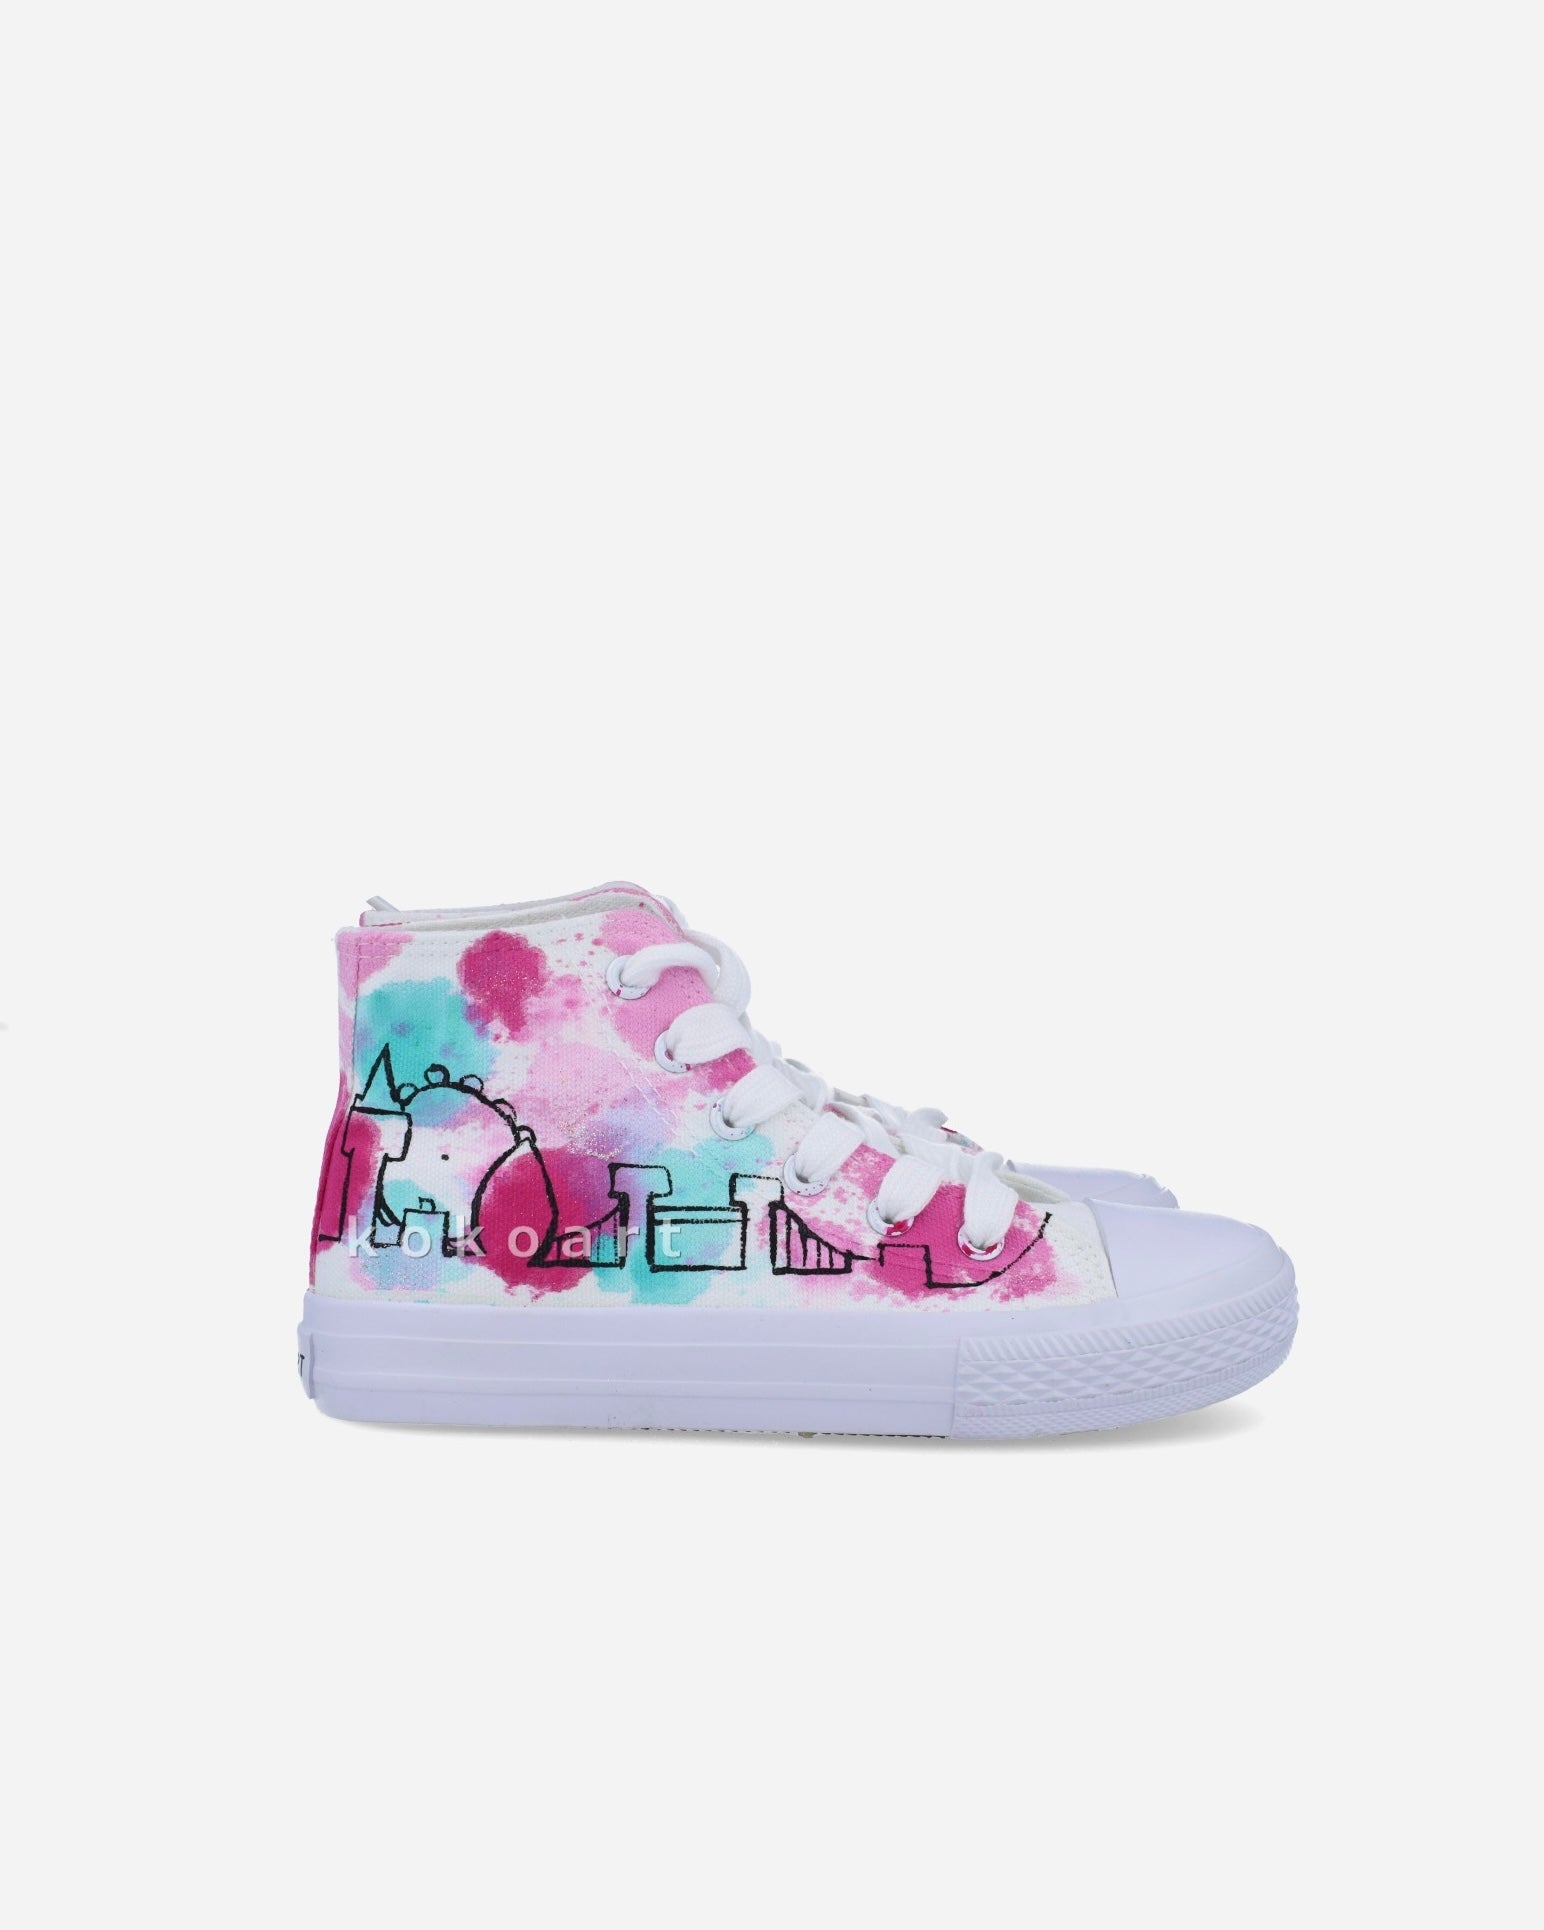 Watercolour London Skyline Hand Painted Shoes